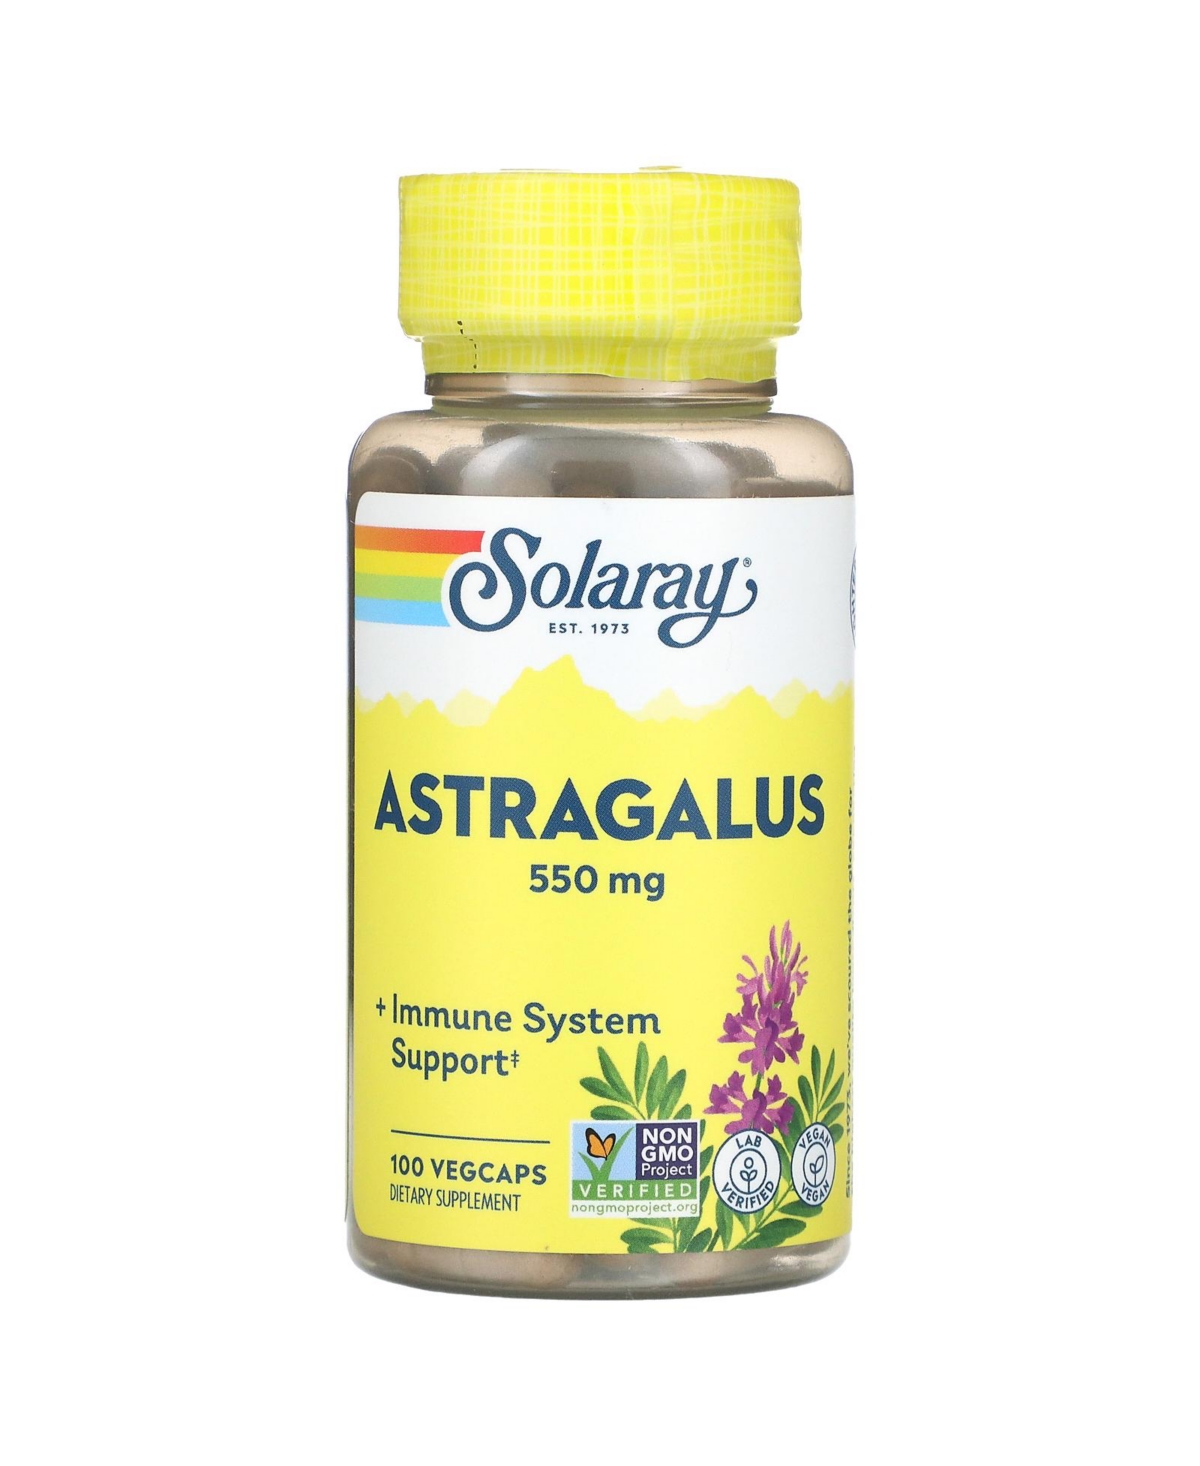 Astragalus 550 mg - 100 VegCaps - Assorted Pre-pack (See Table